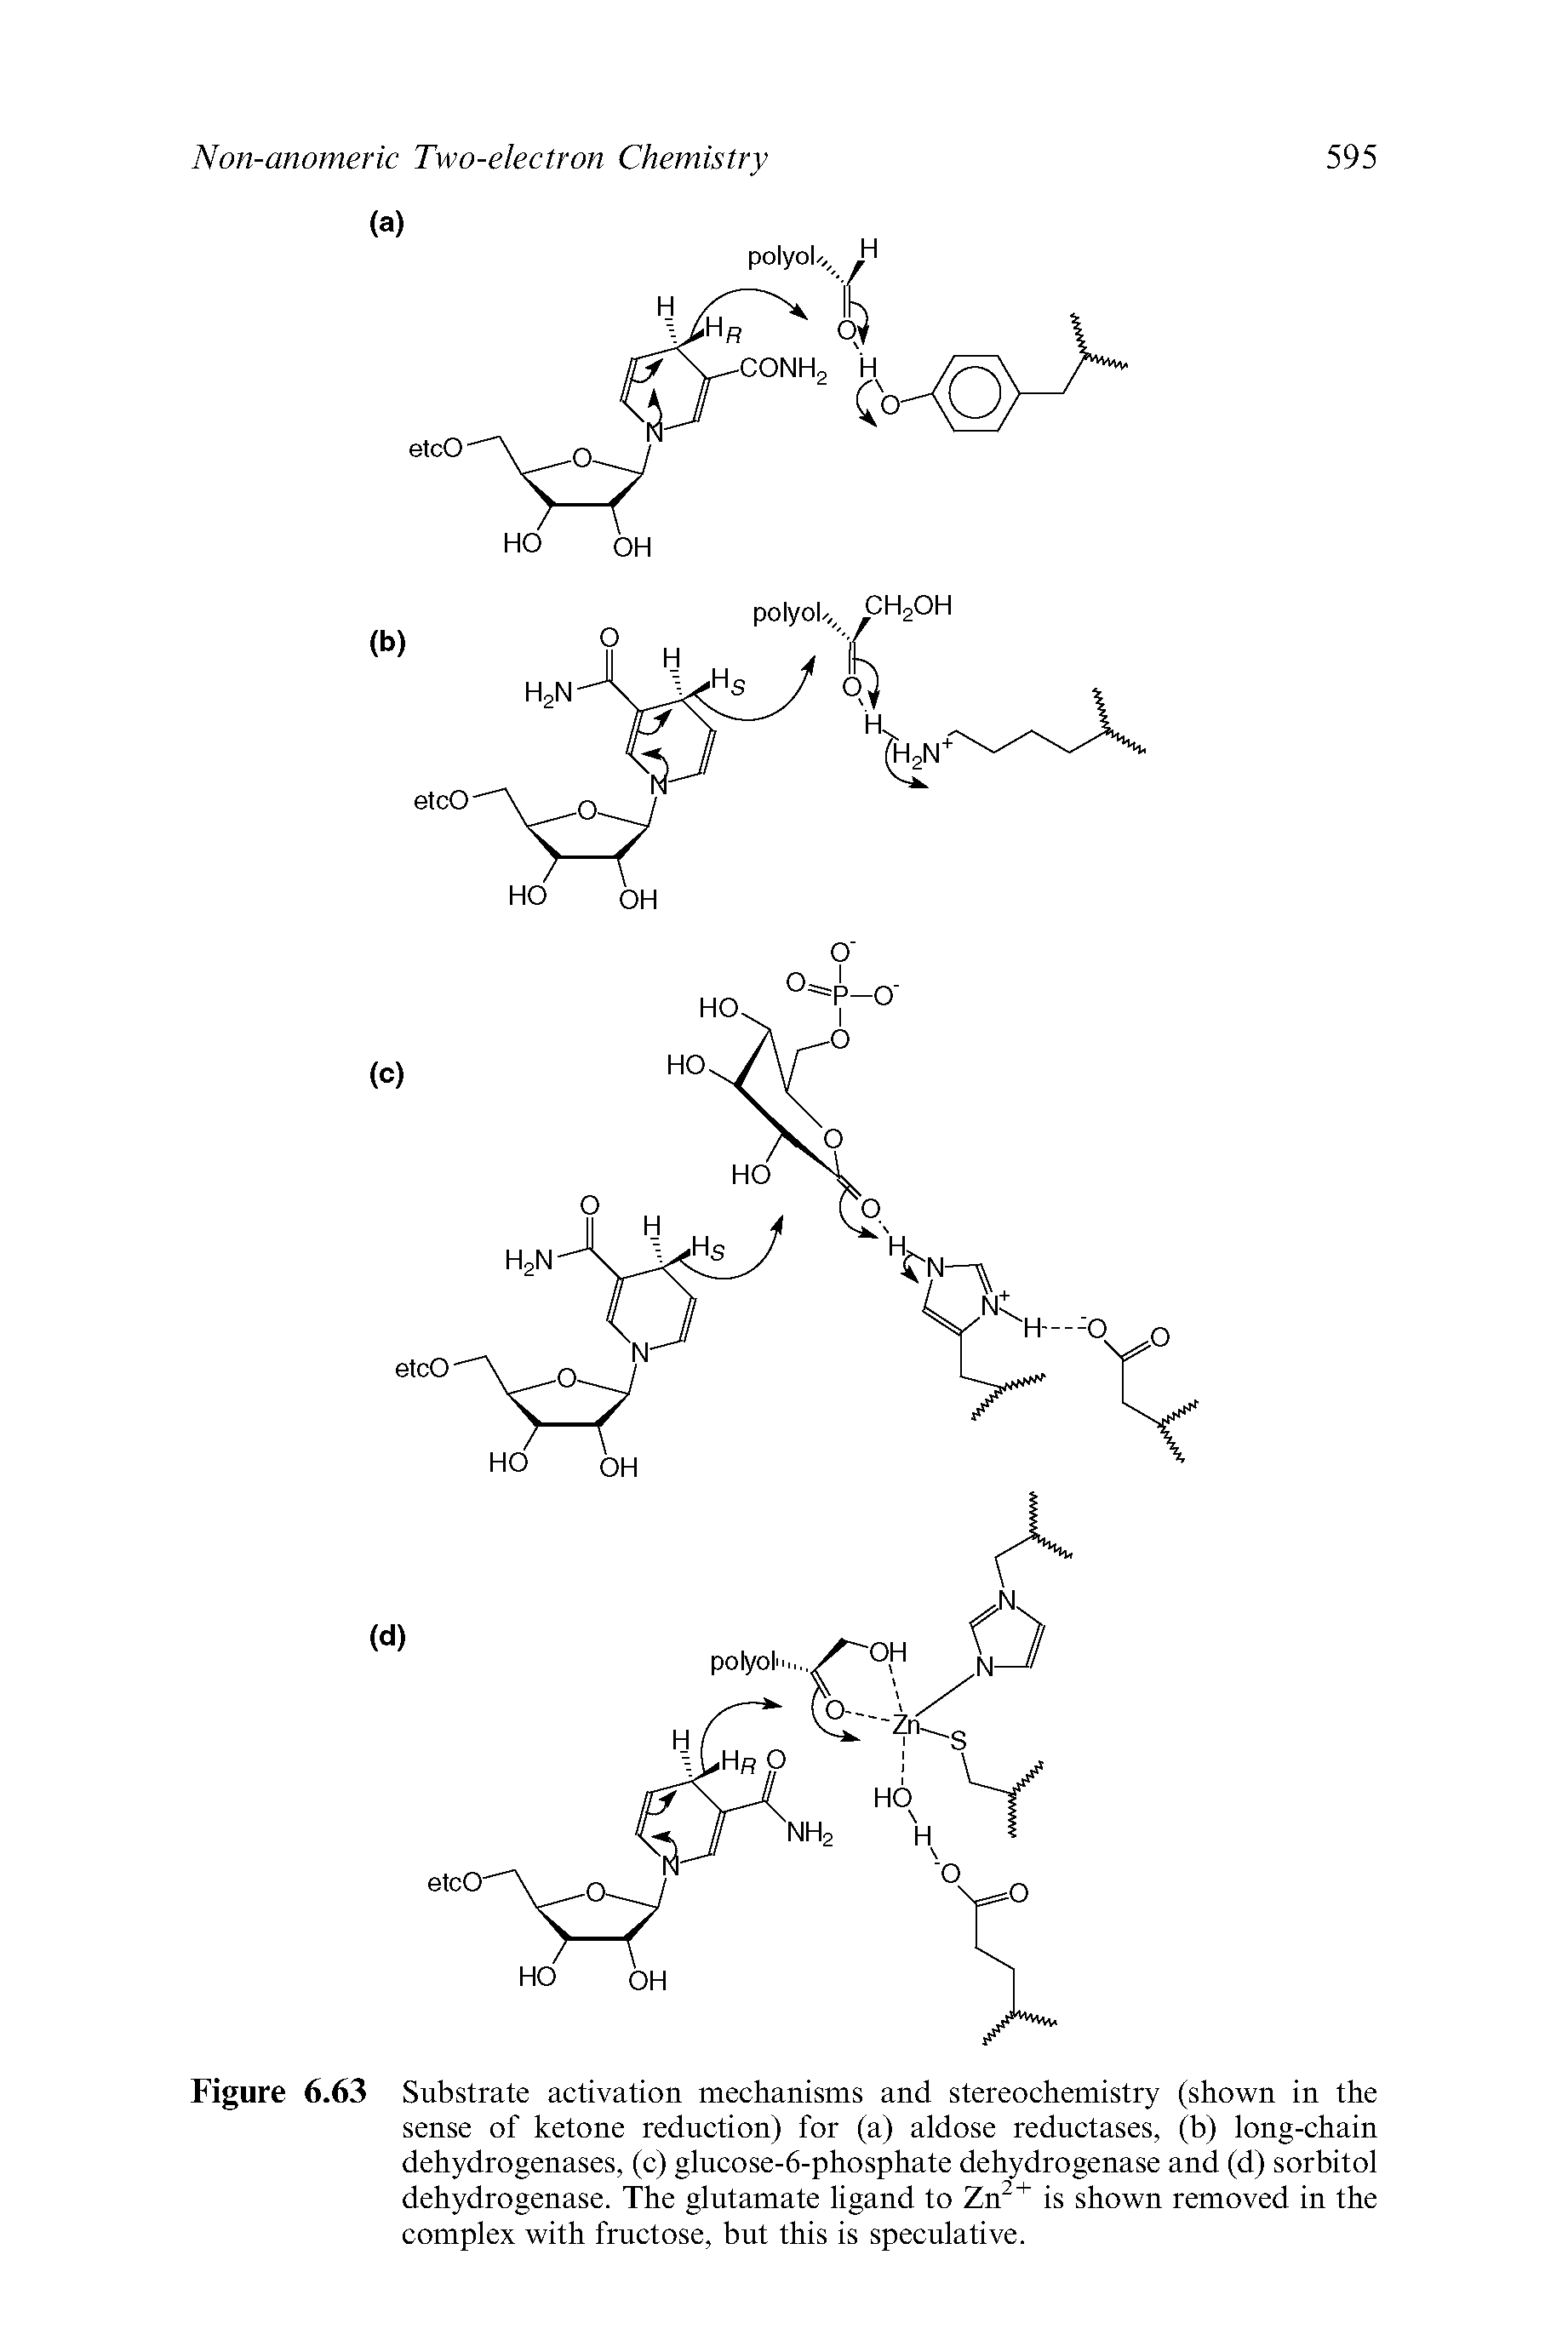 Figure 6.63 Substrate activation mechanisms and stereochemistry (shown in the sense of ketone reduction) for (a) aldose reductases, (b) long-chain dehydrogenases, (c) glucose-6-phosphate dehydrogenase and (d) sorbitol dehydrogenase. The glutamate ligand to Zn is shown removed in the complex with fructose, but this is speculative.